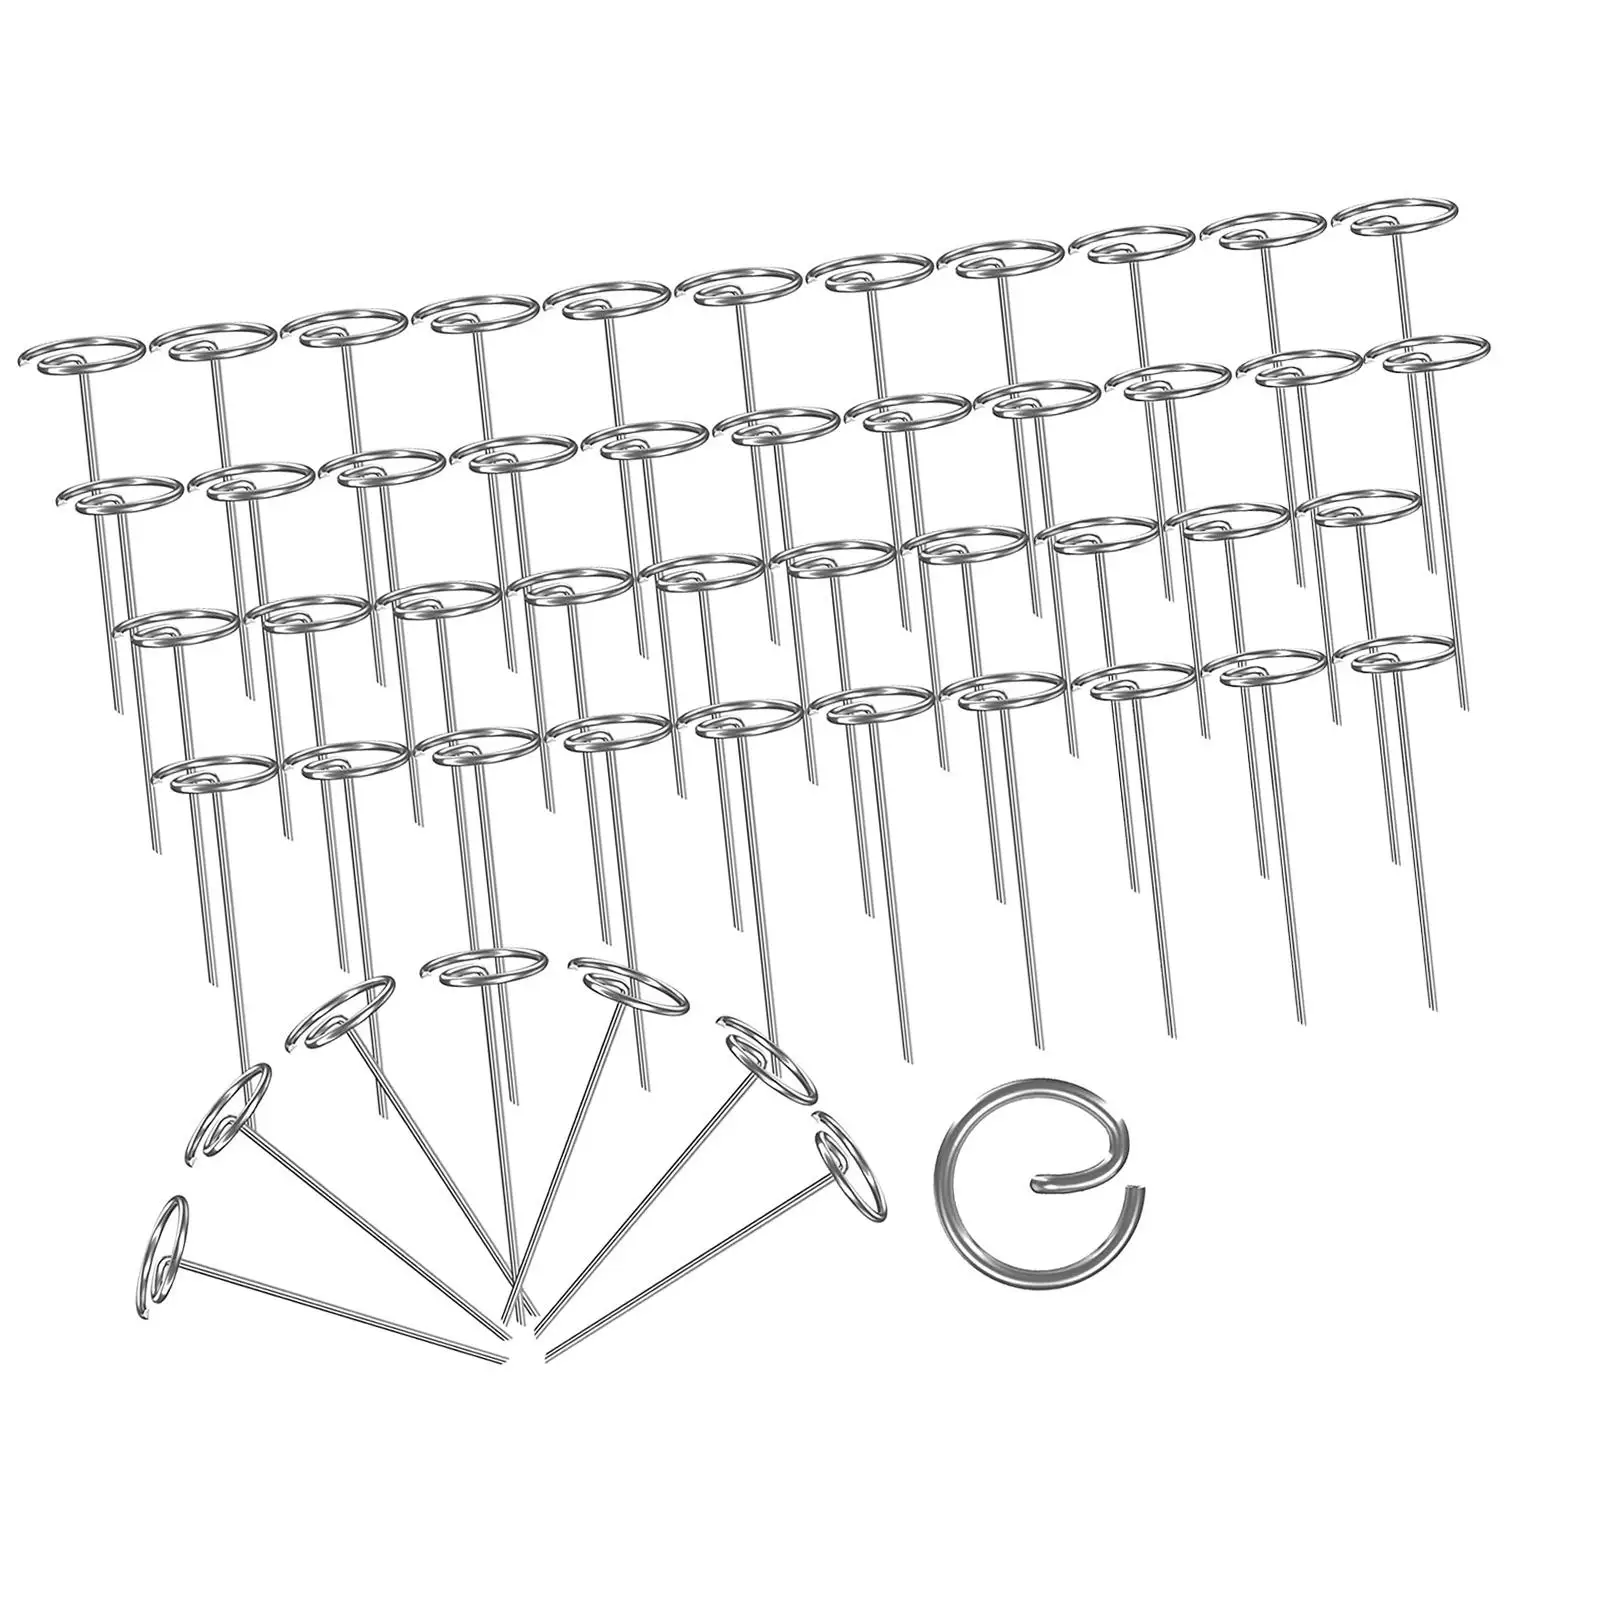 50 Pieces Circle Top Pins 4 inch Landscape Staples Membrane Pegs Heavy Duty Landscape Pins sod Staples for Barrier Yard Outdoor